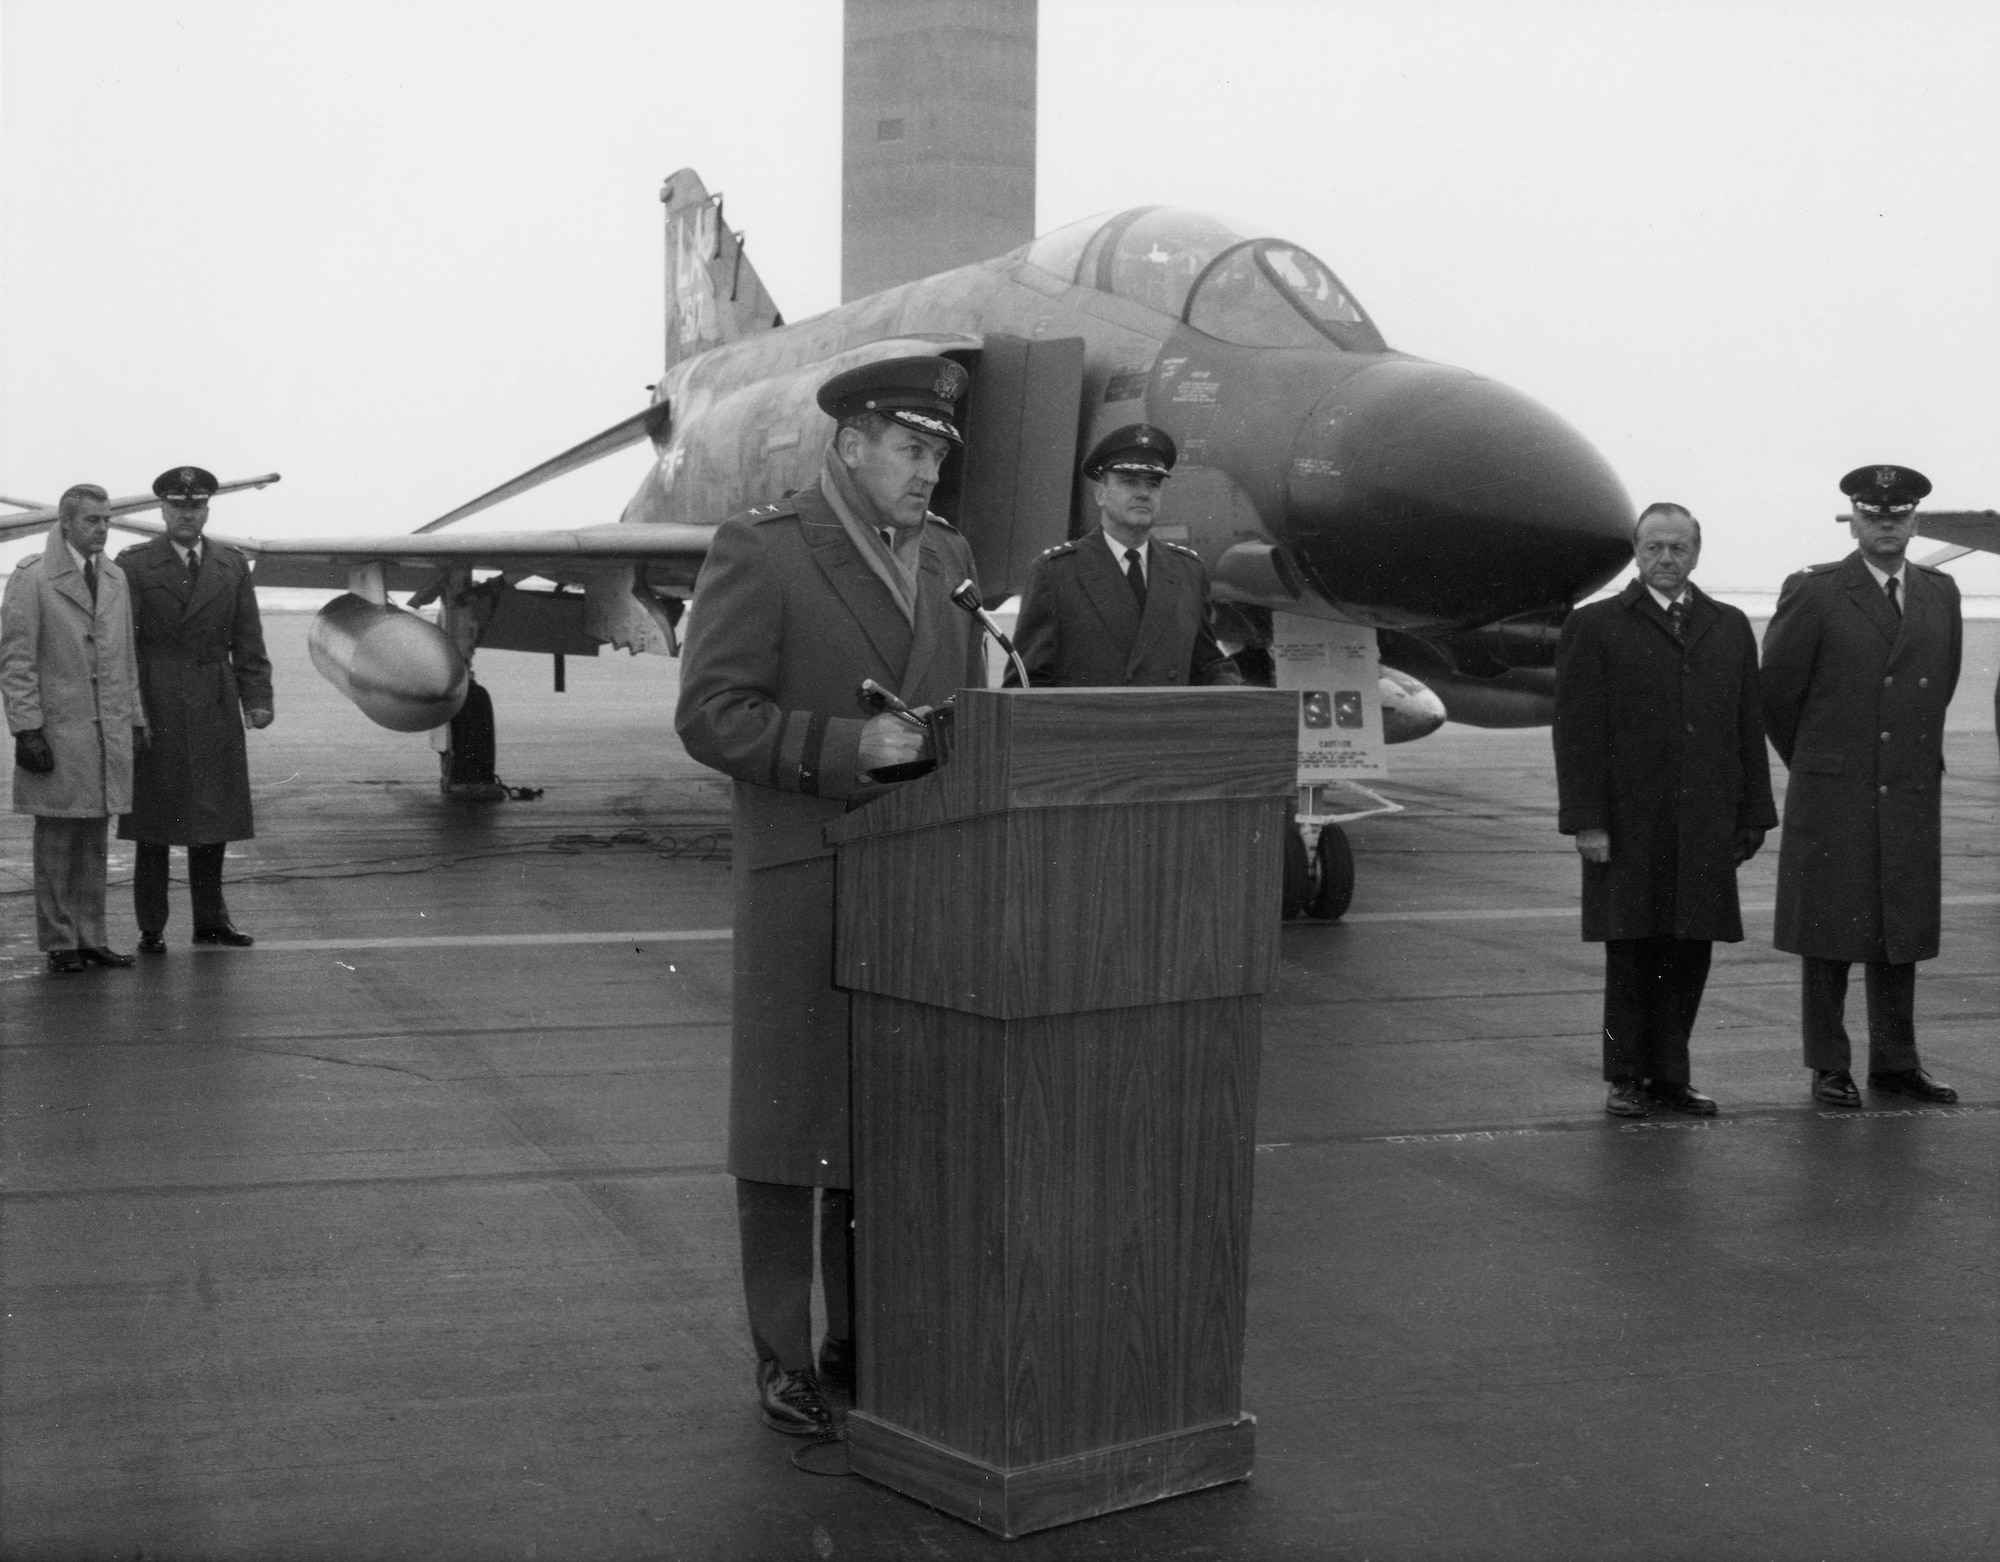 Tactical Air Command reassigned the 388th Tactical Fighter Wing to Hill AFB from Korat Royal Thai AB, Thailand, equipped with 54 F-4Ds, in December 1975. Air Force leaders marked the occasion with a ceremony at Hill AFB on a cold, winter day in January 1976.